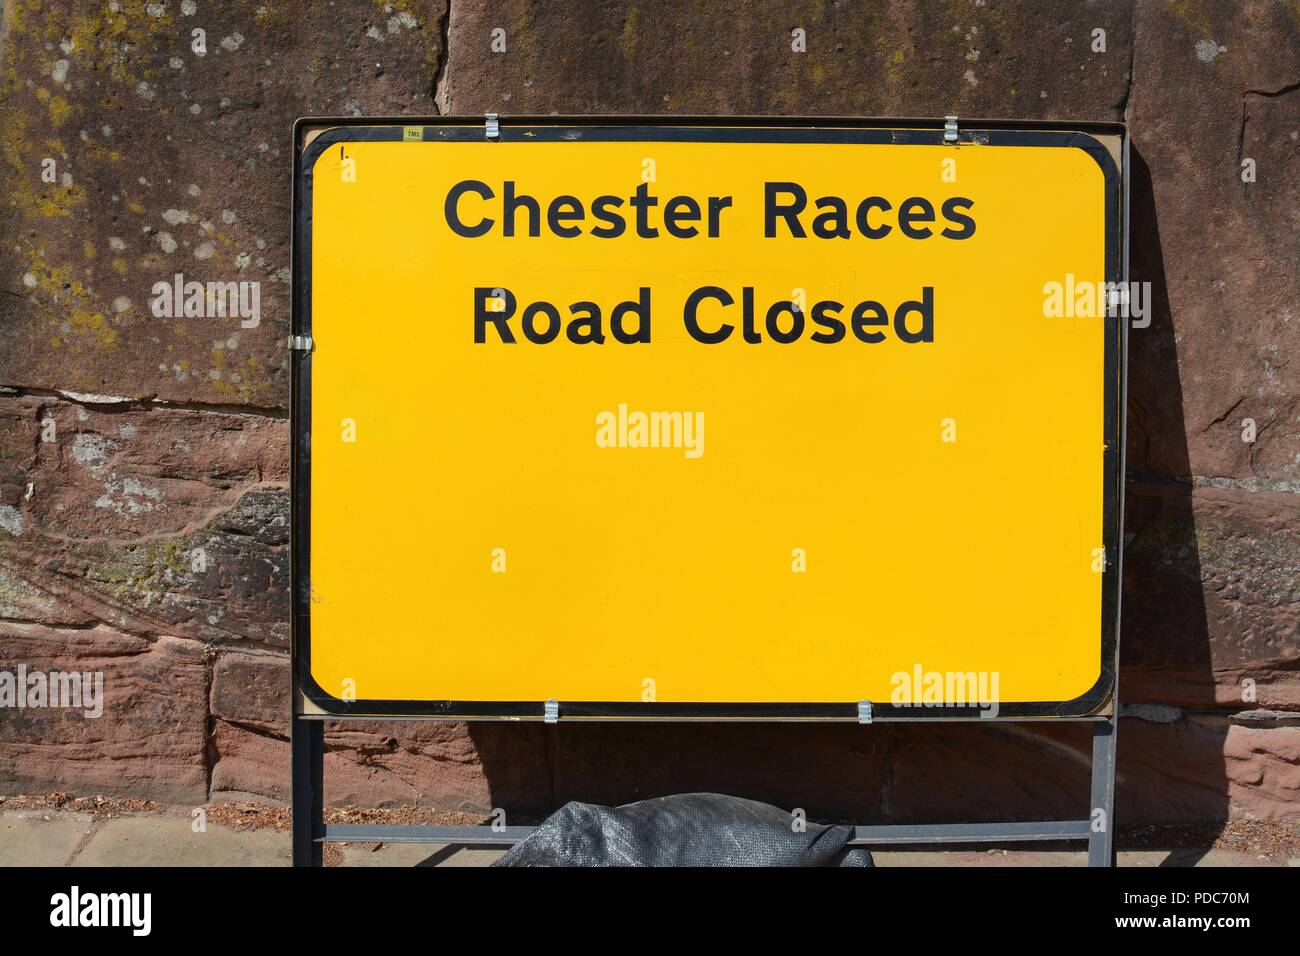 Chester race course road sign Foto Stock